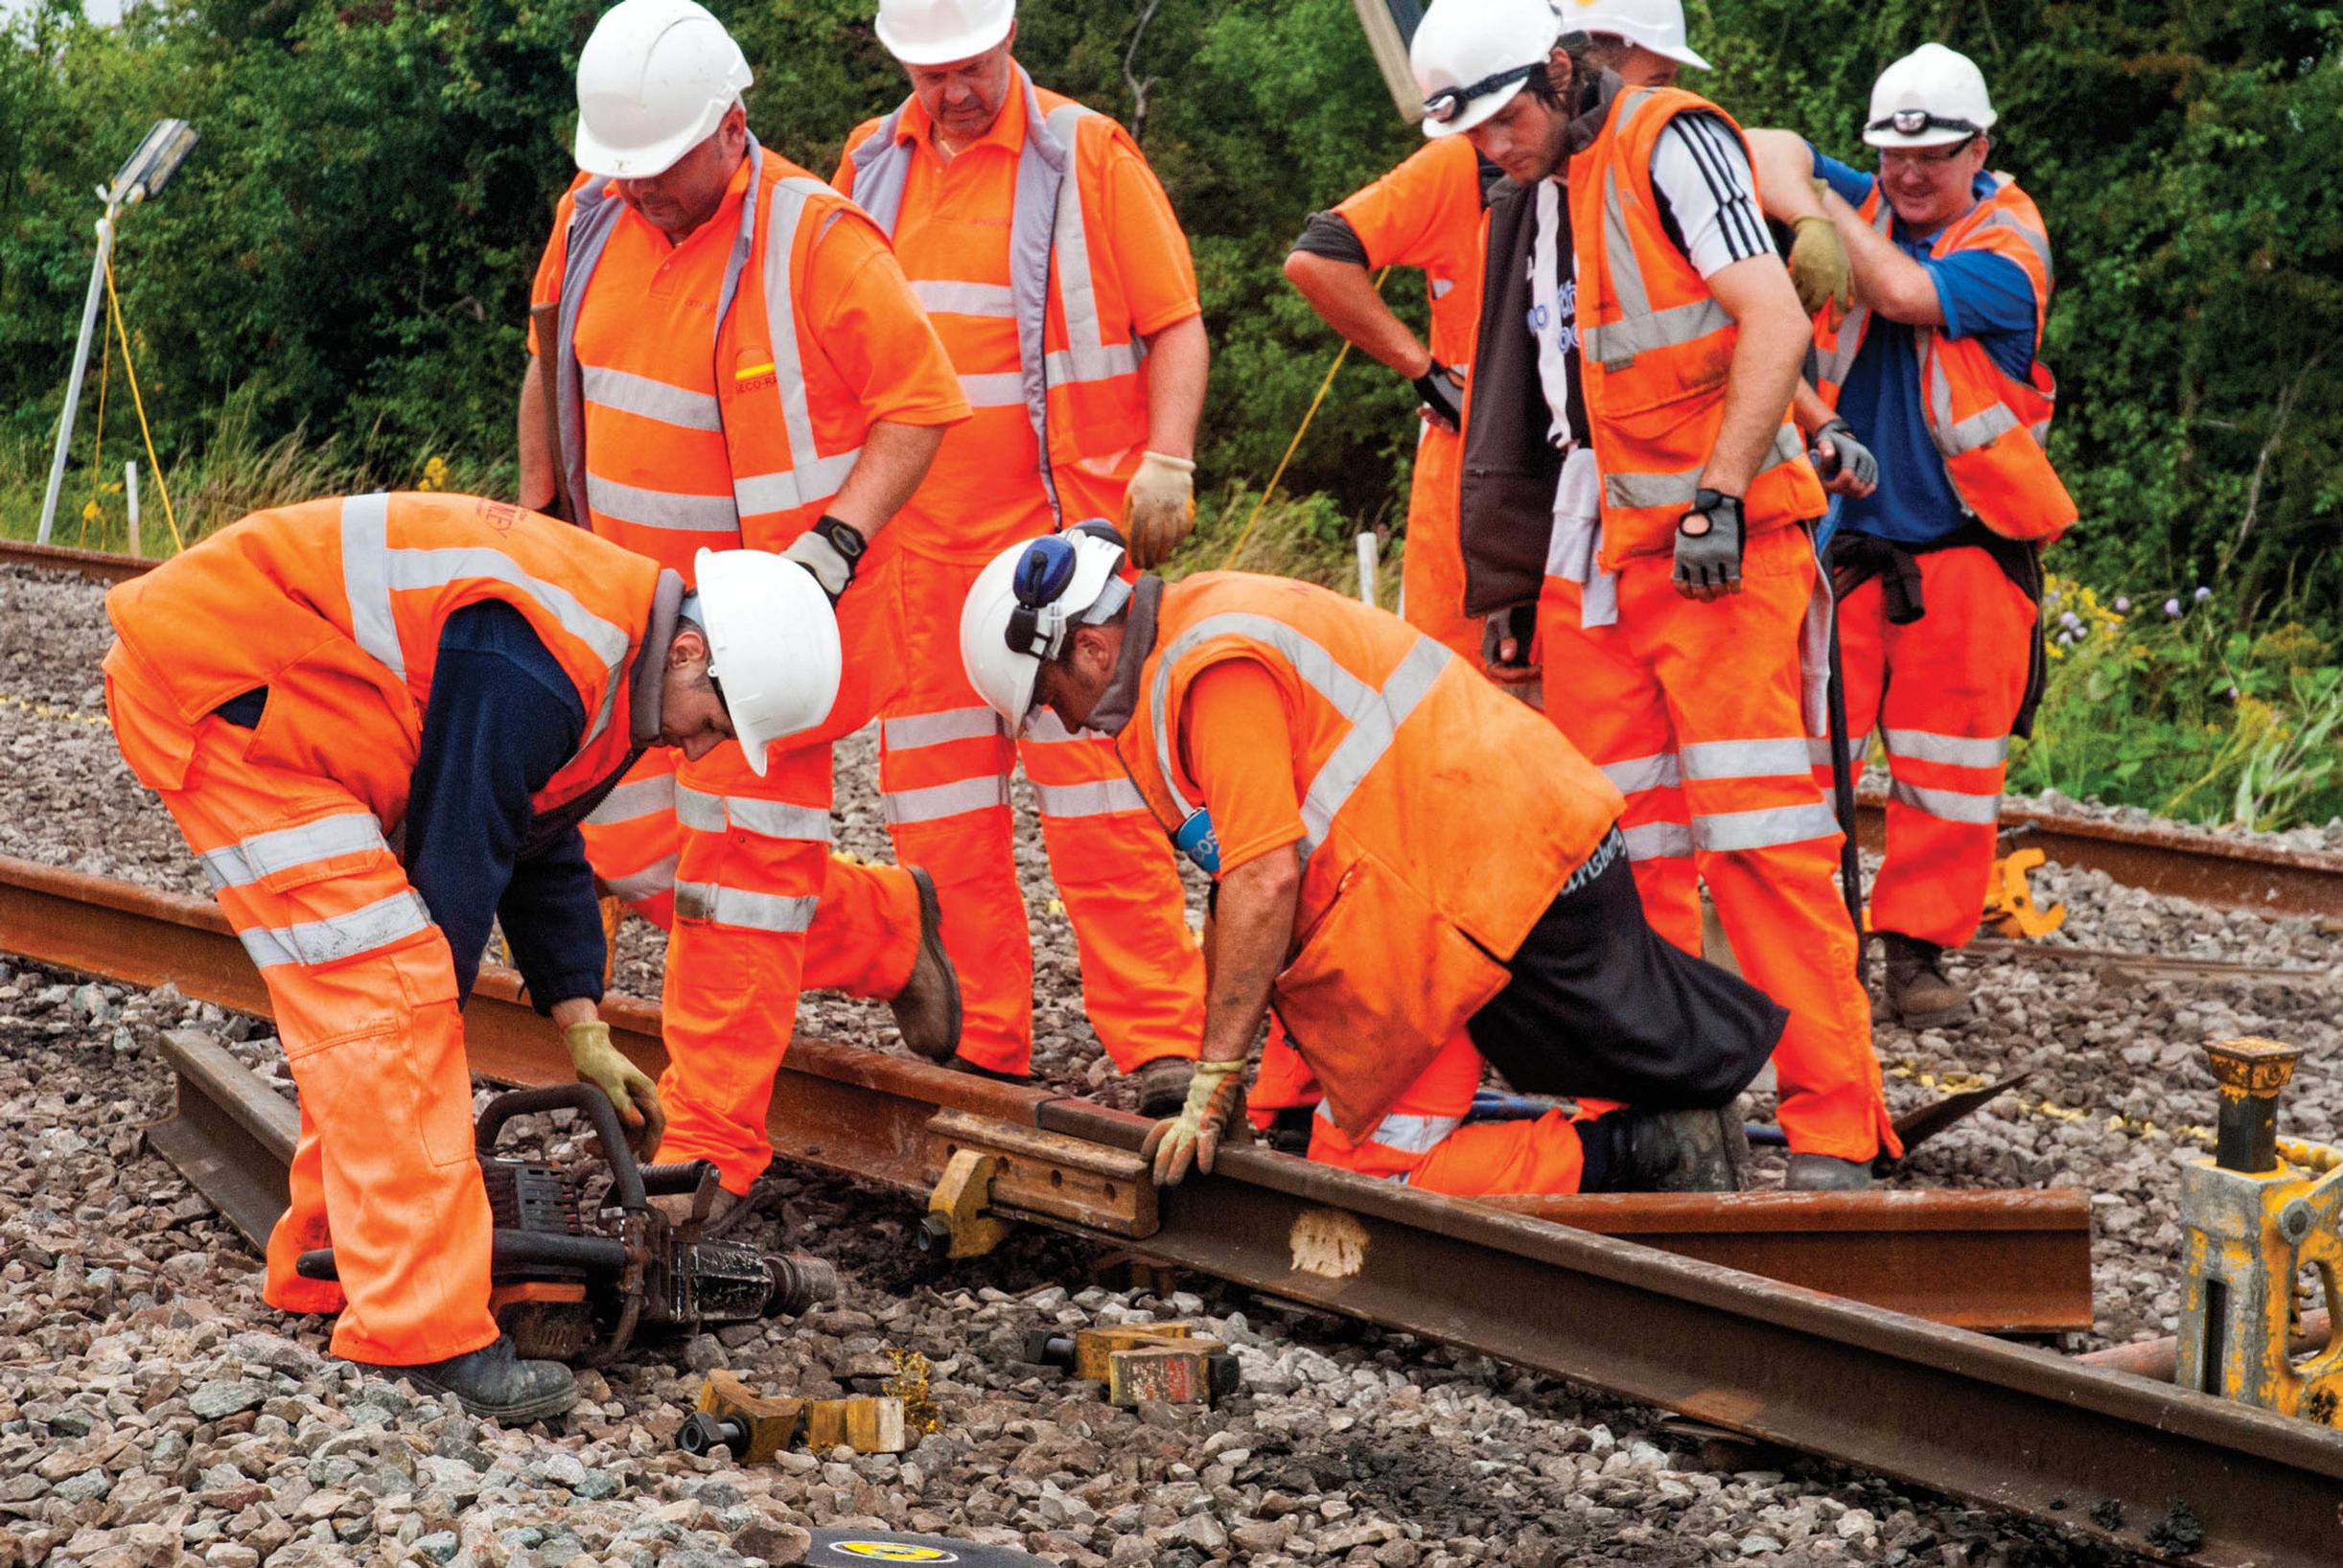 Compensation payments for disruptive events such as track engineering are based on operators’ costs rather than impacts on end users such as passengers